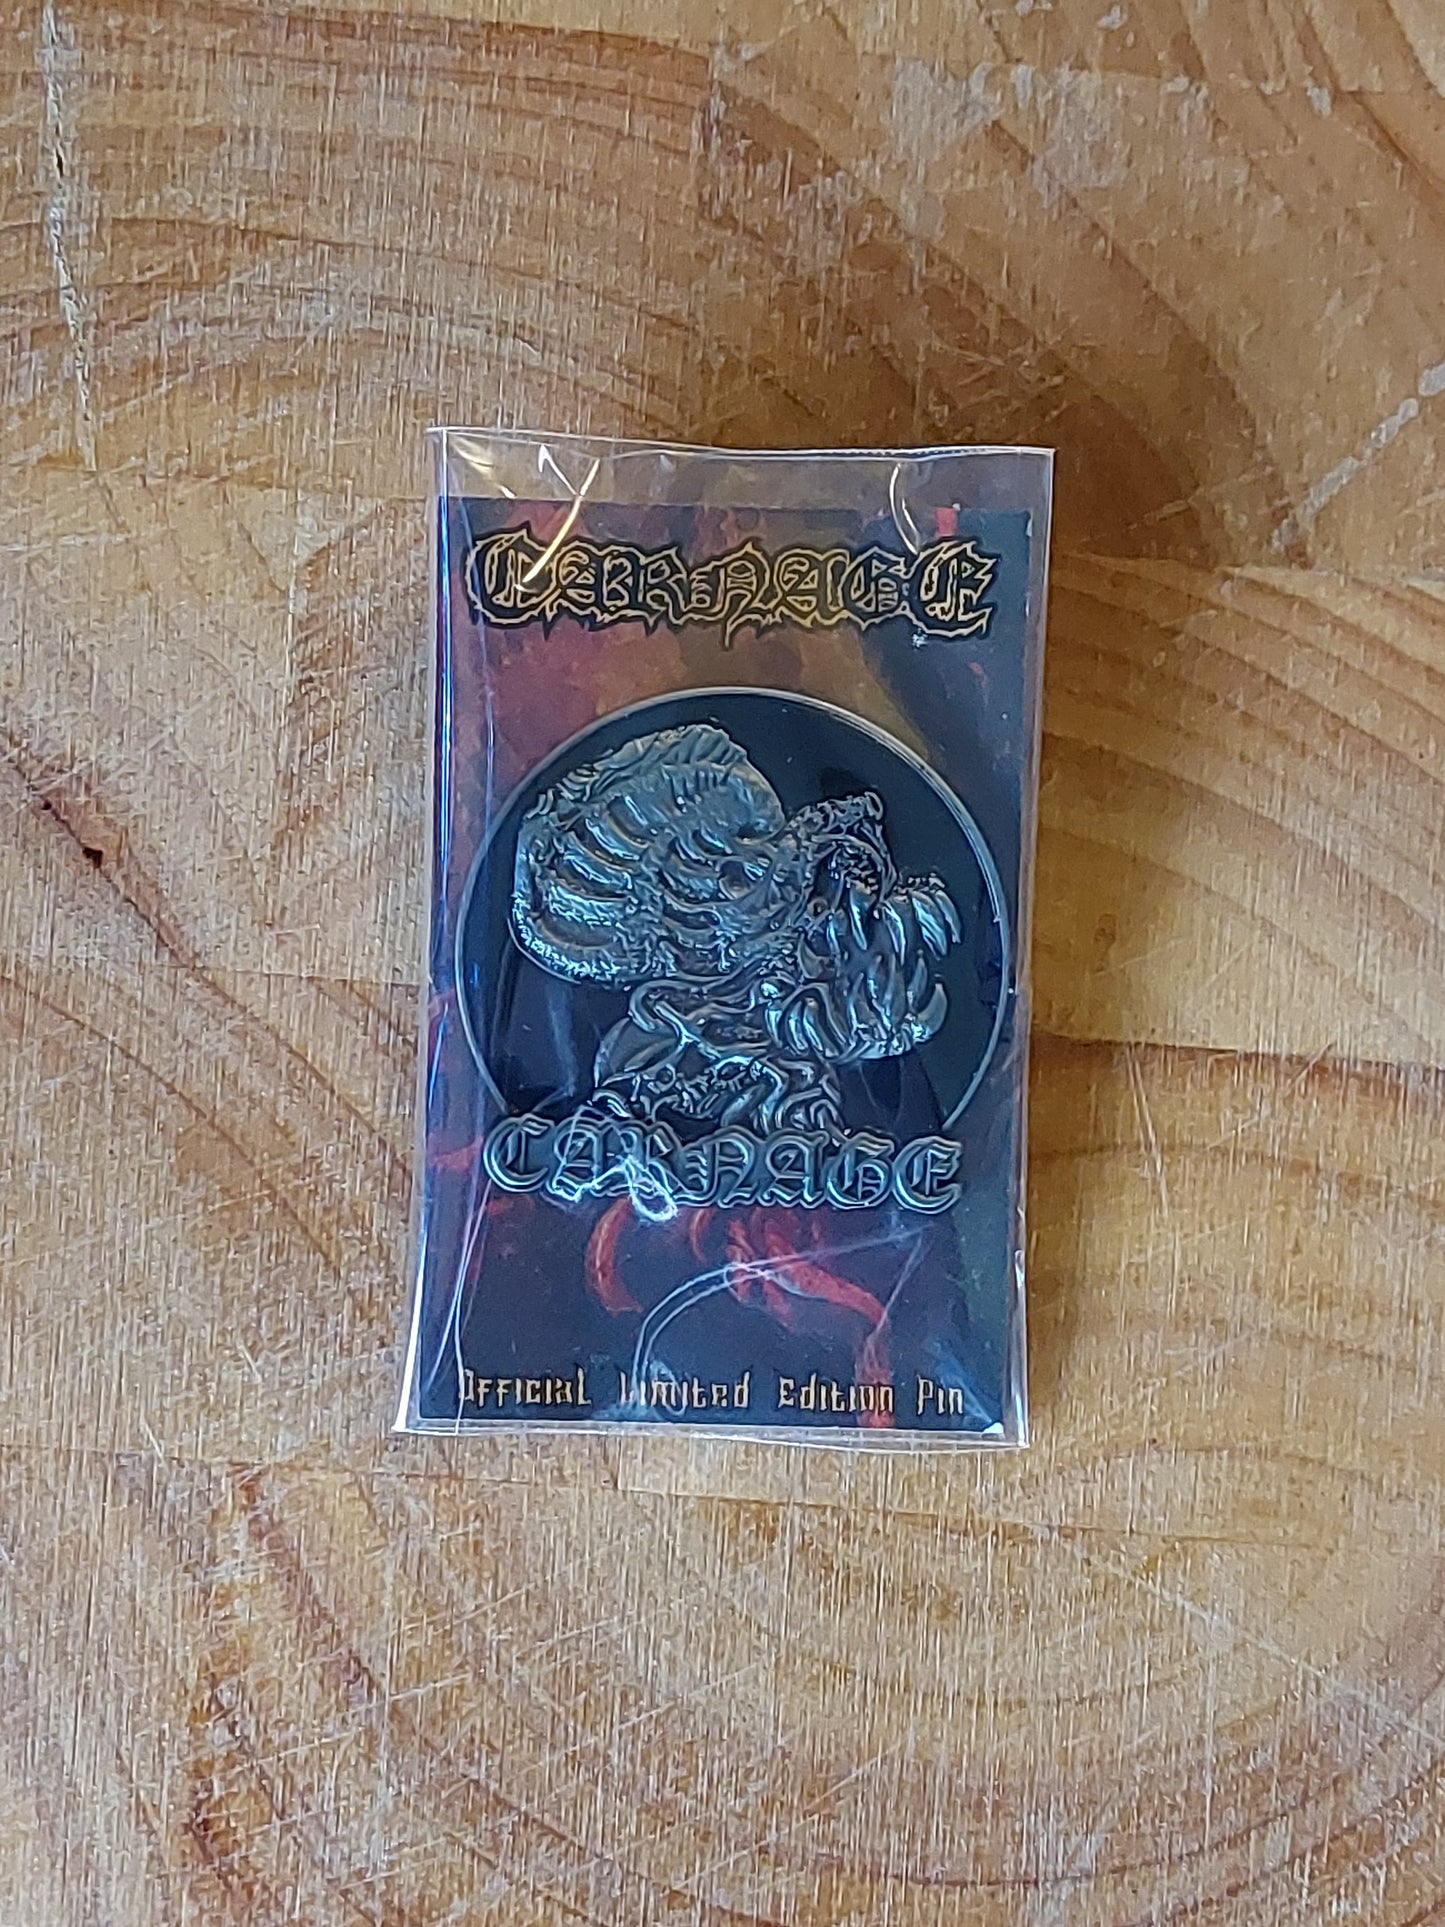 Carnage - Dark recollections 3D badge